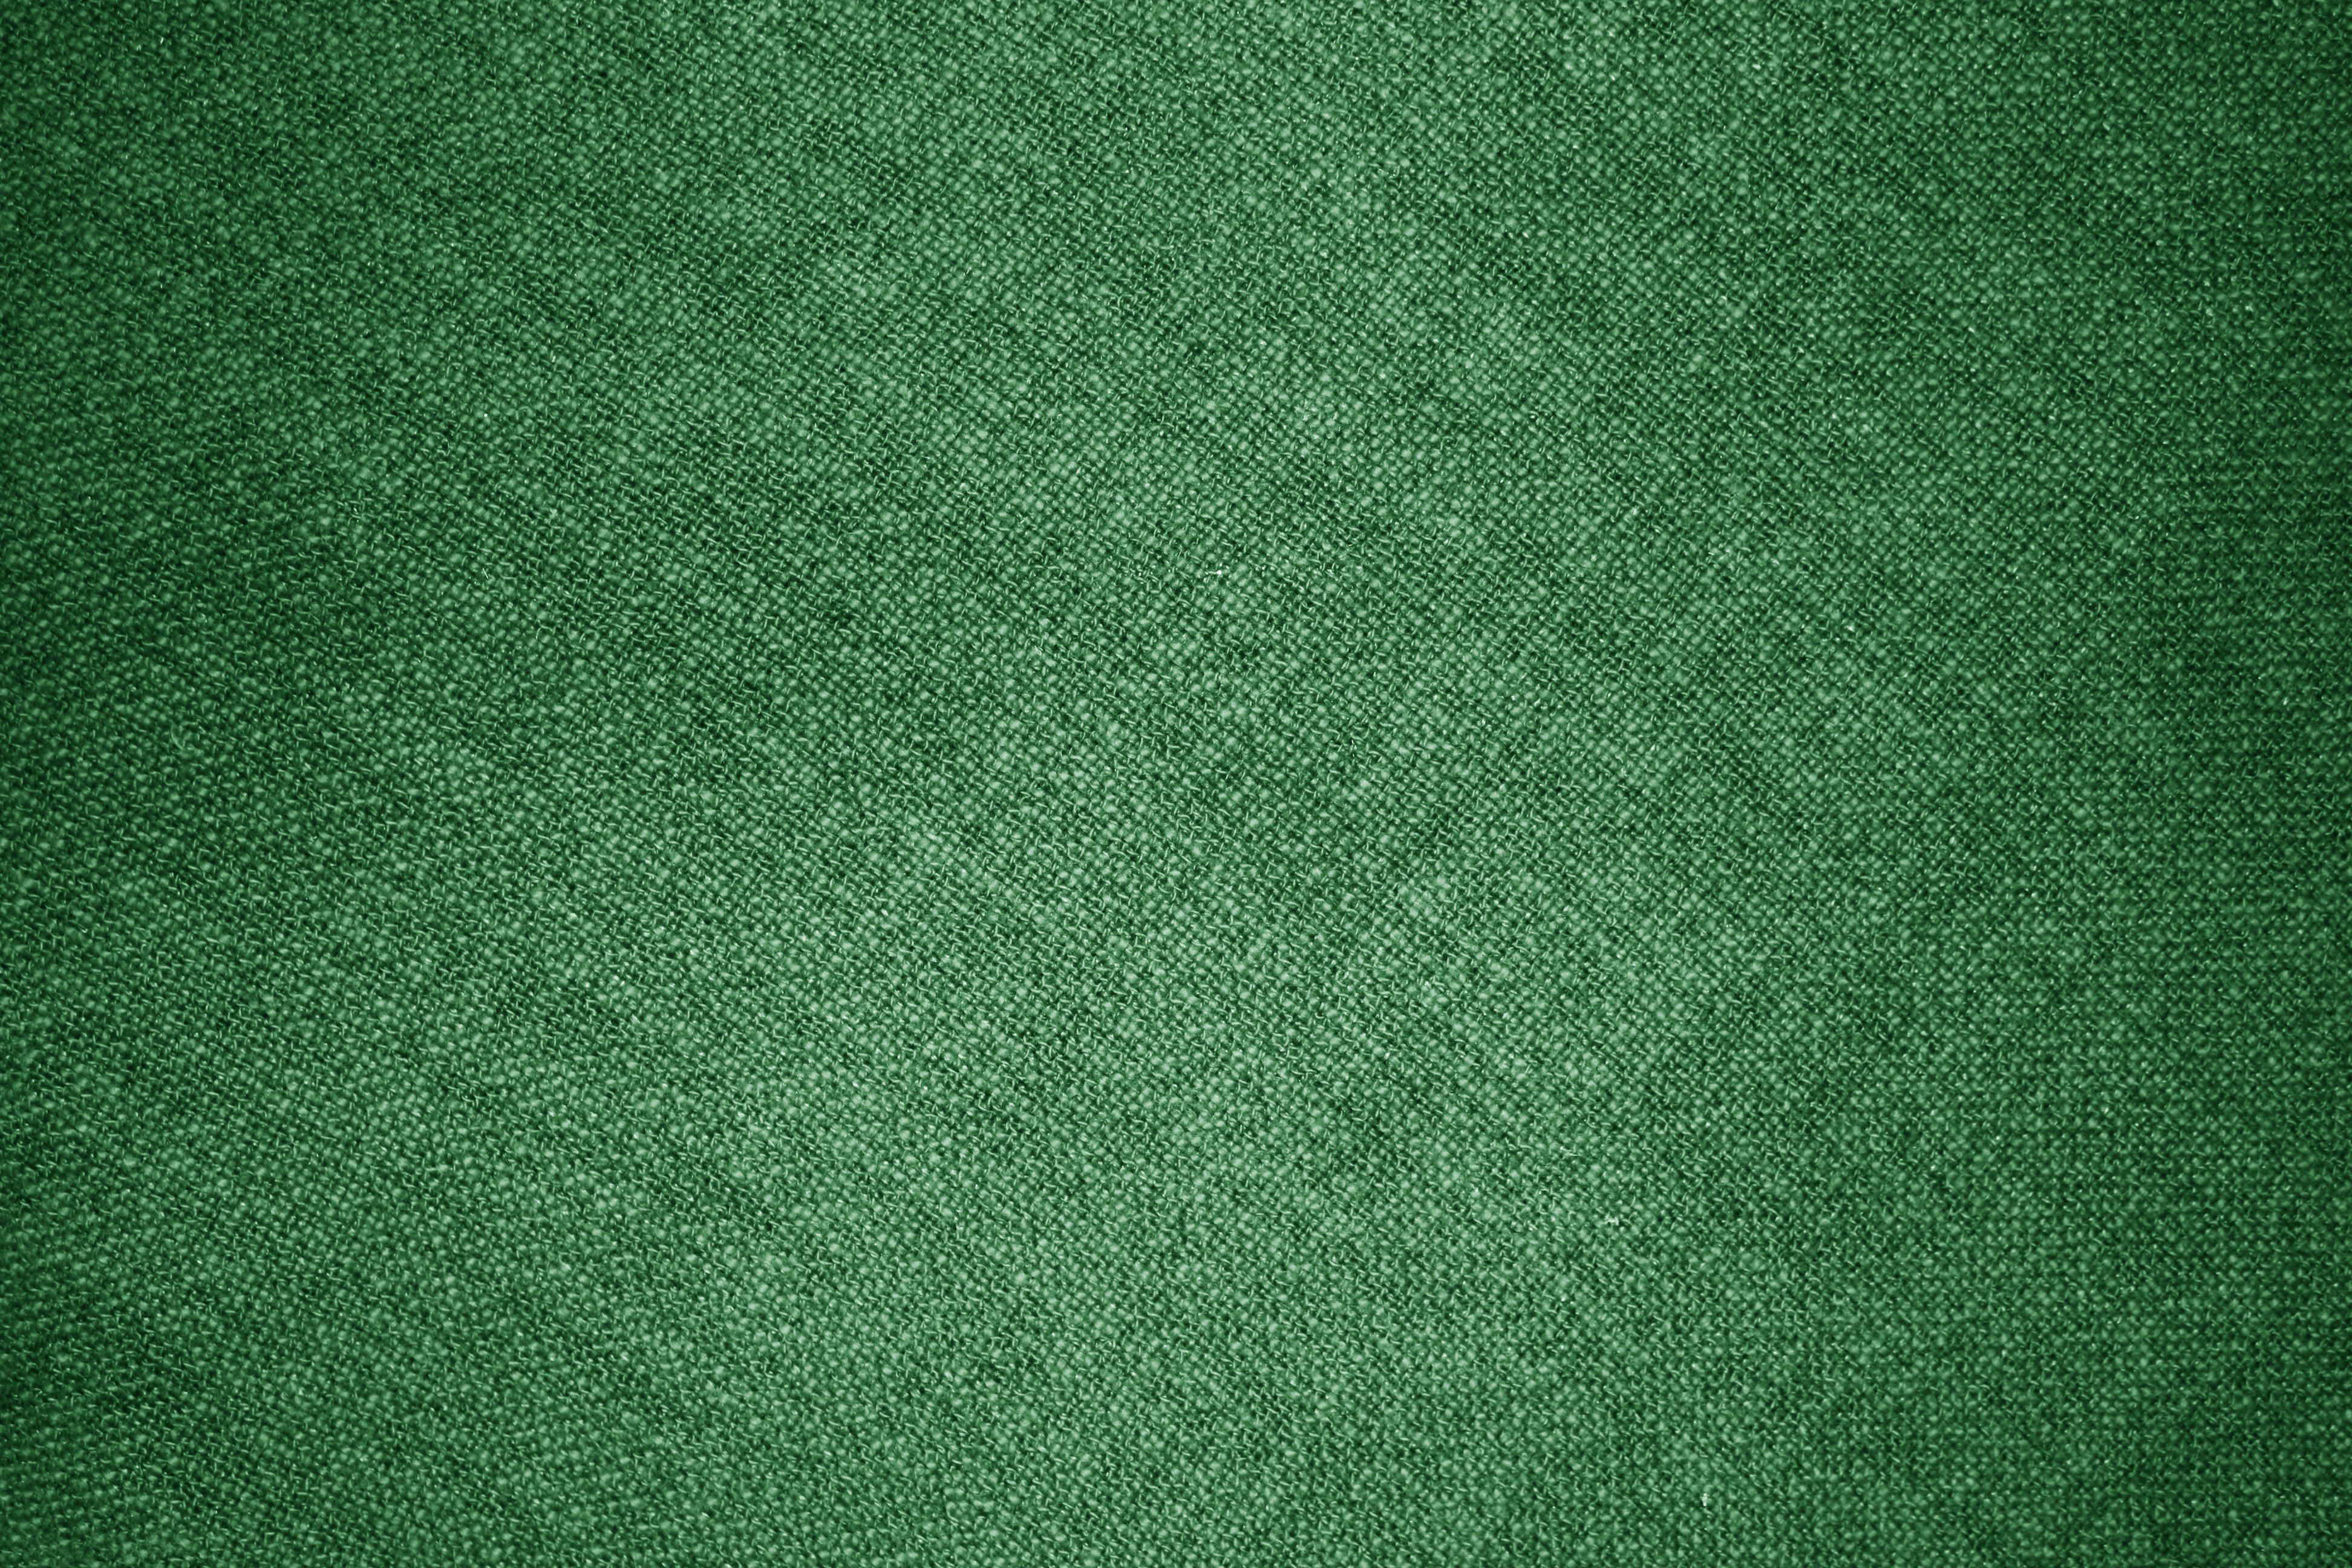 Green Fabric Texture Picture | Free Photograph | Photos Public Domain